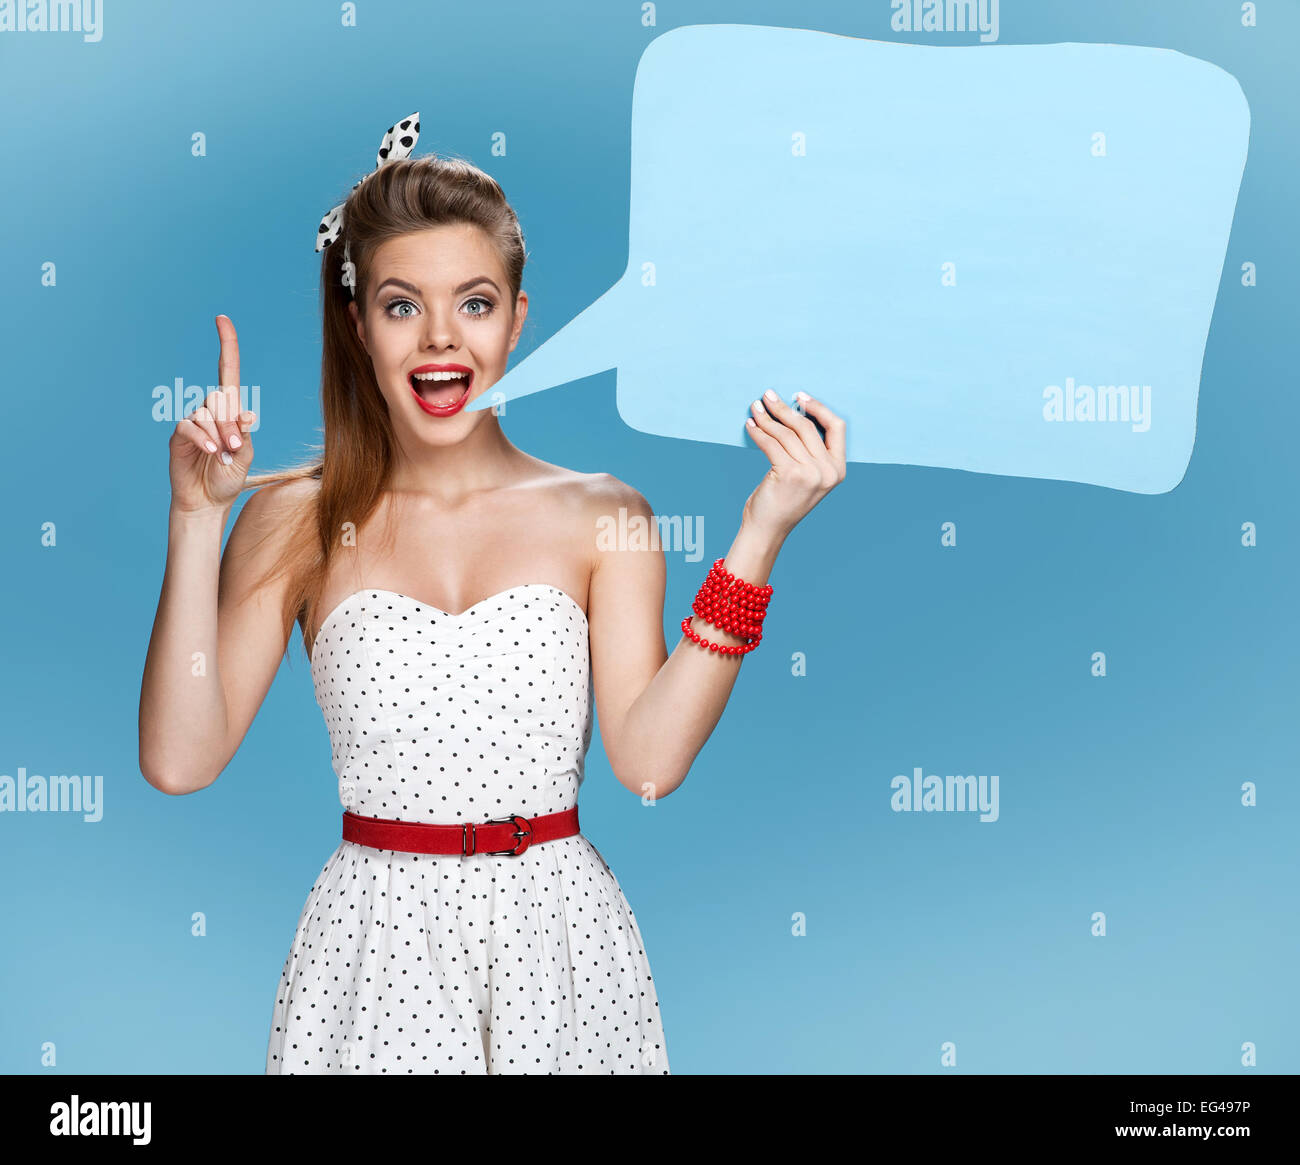 Conversable beautiful woman showing sign speech bubble banner looking happy excited Stock Photo